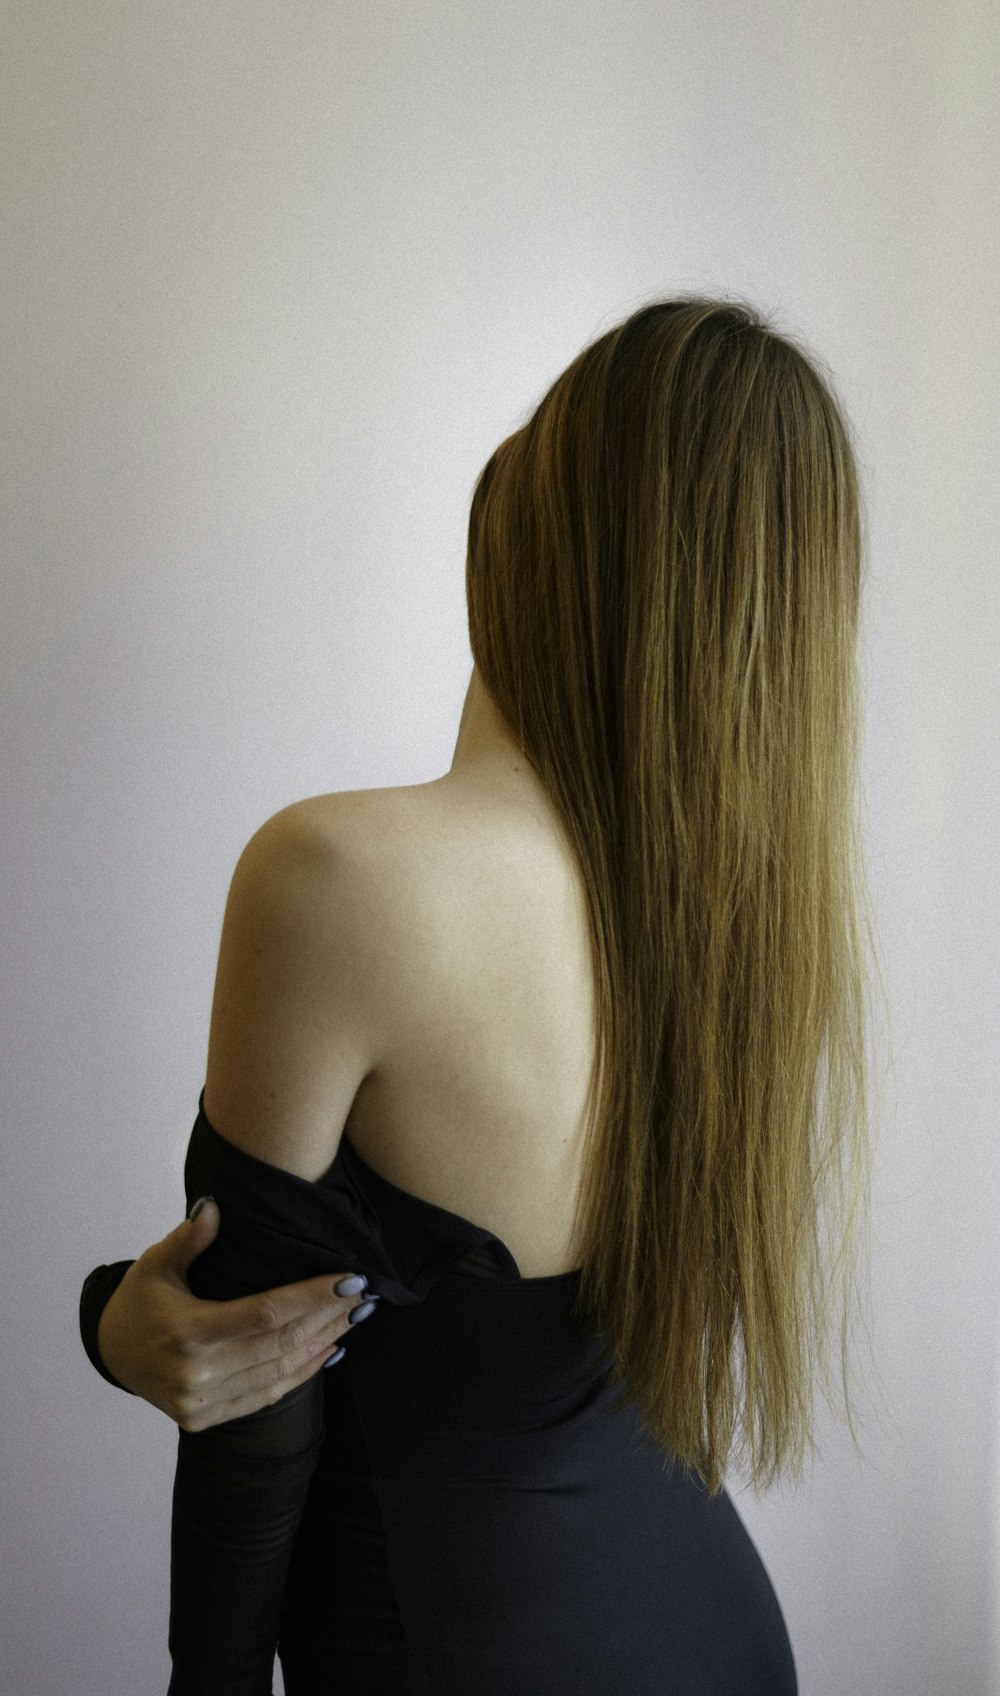 a woman in a black dress with long hair